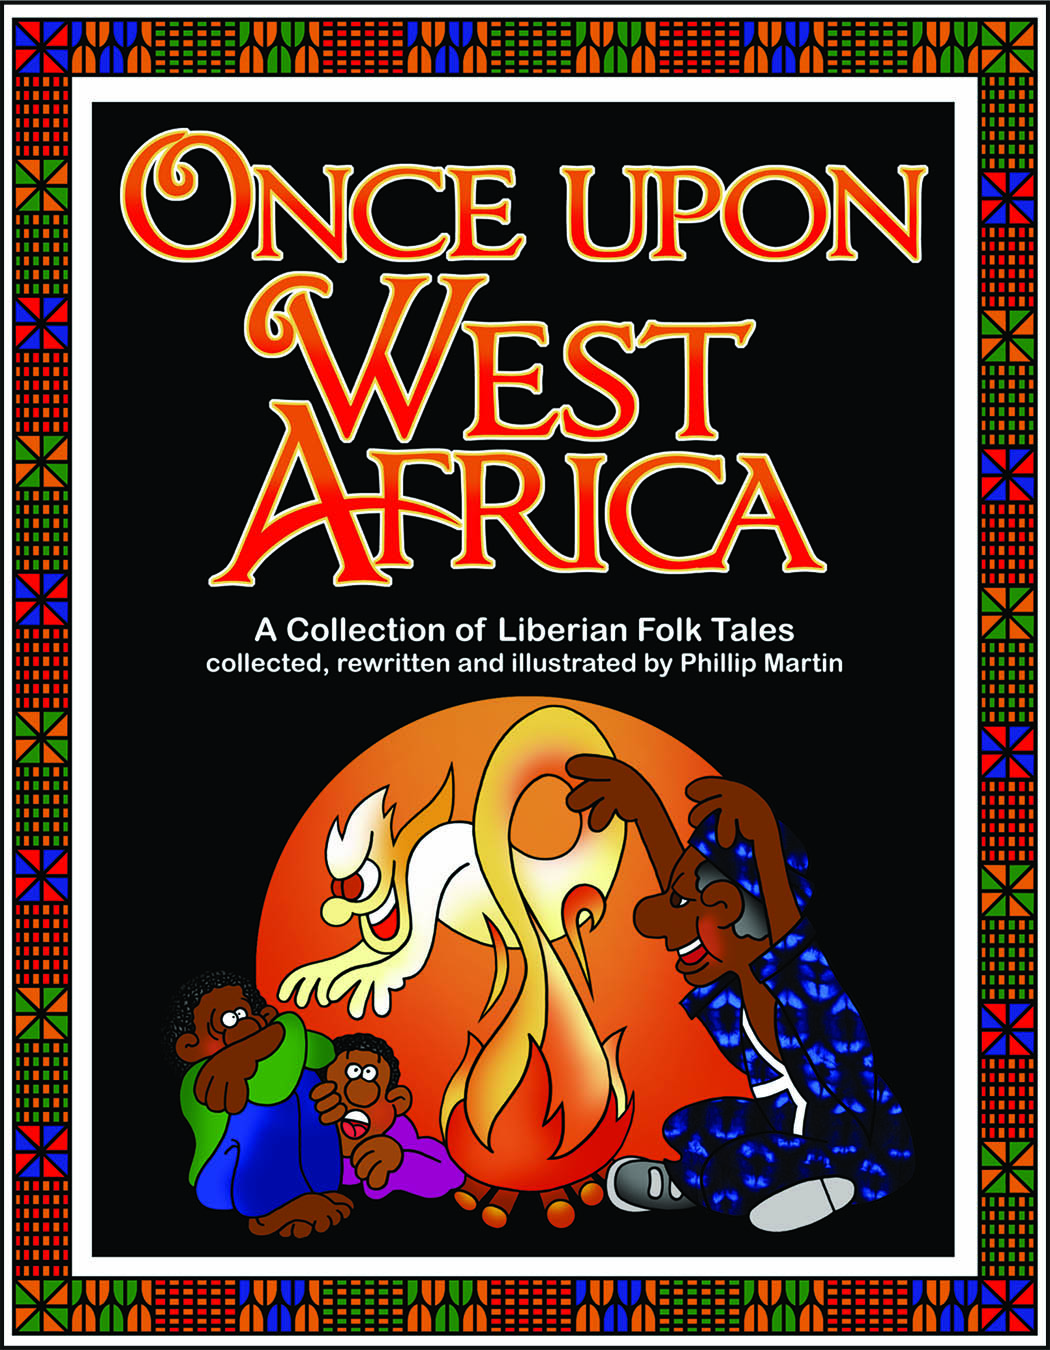 Once Upon West Africa: A Collection of Liberian Folk Tales